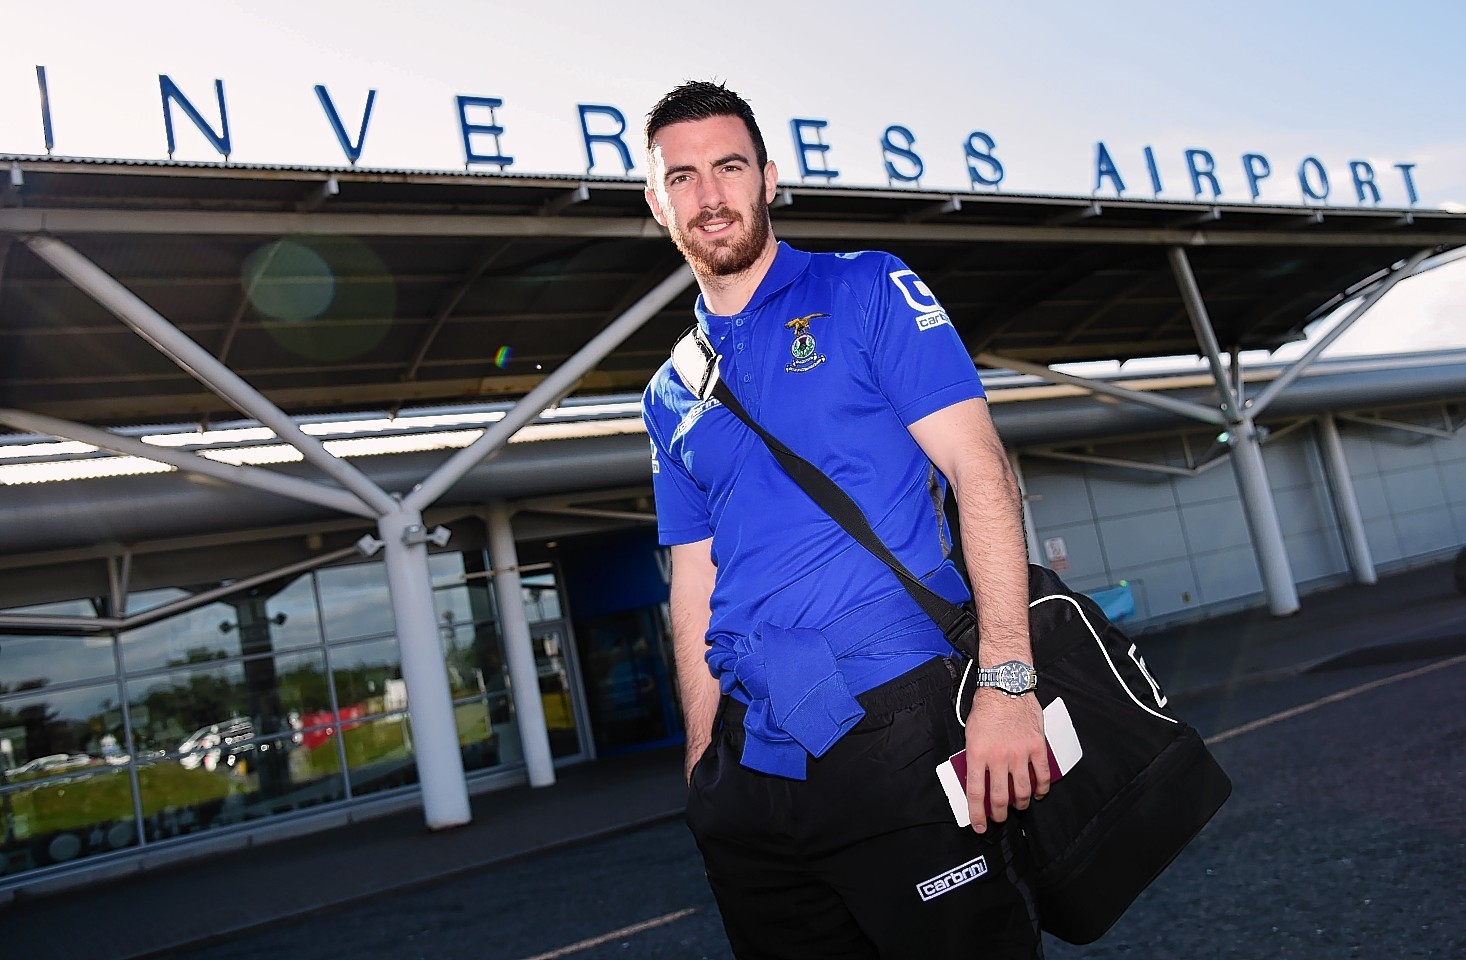 Ross Draper poses outside Inverness Airport as ICT await their flight to Romania.